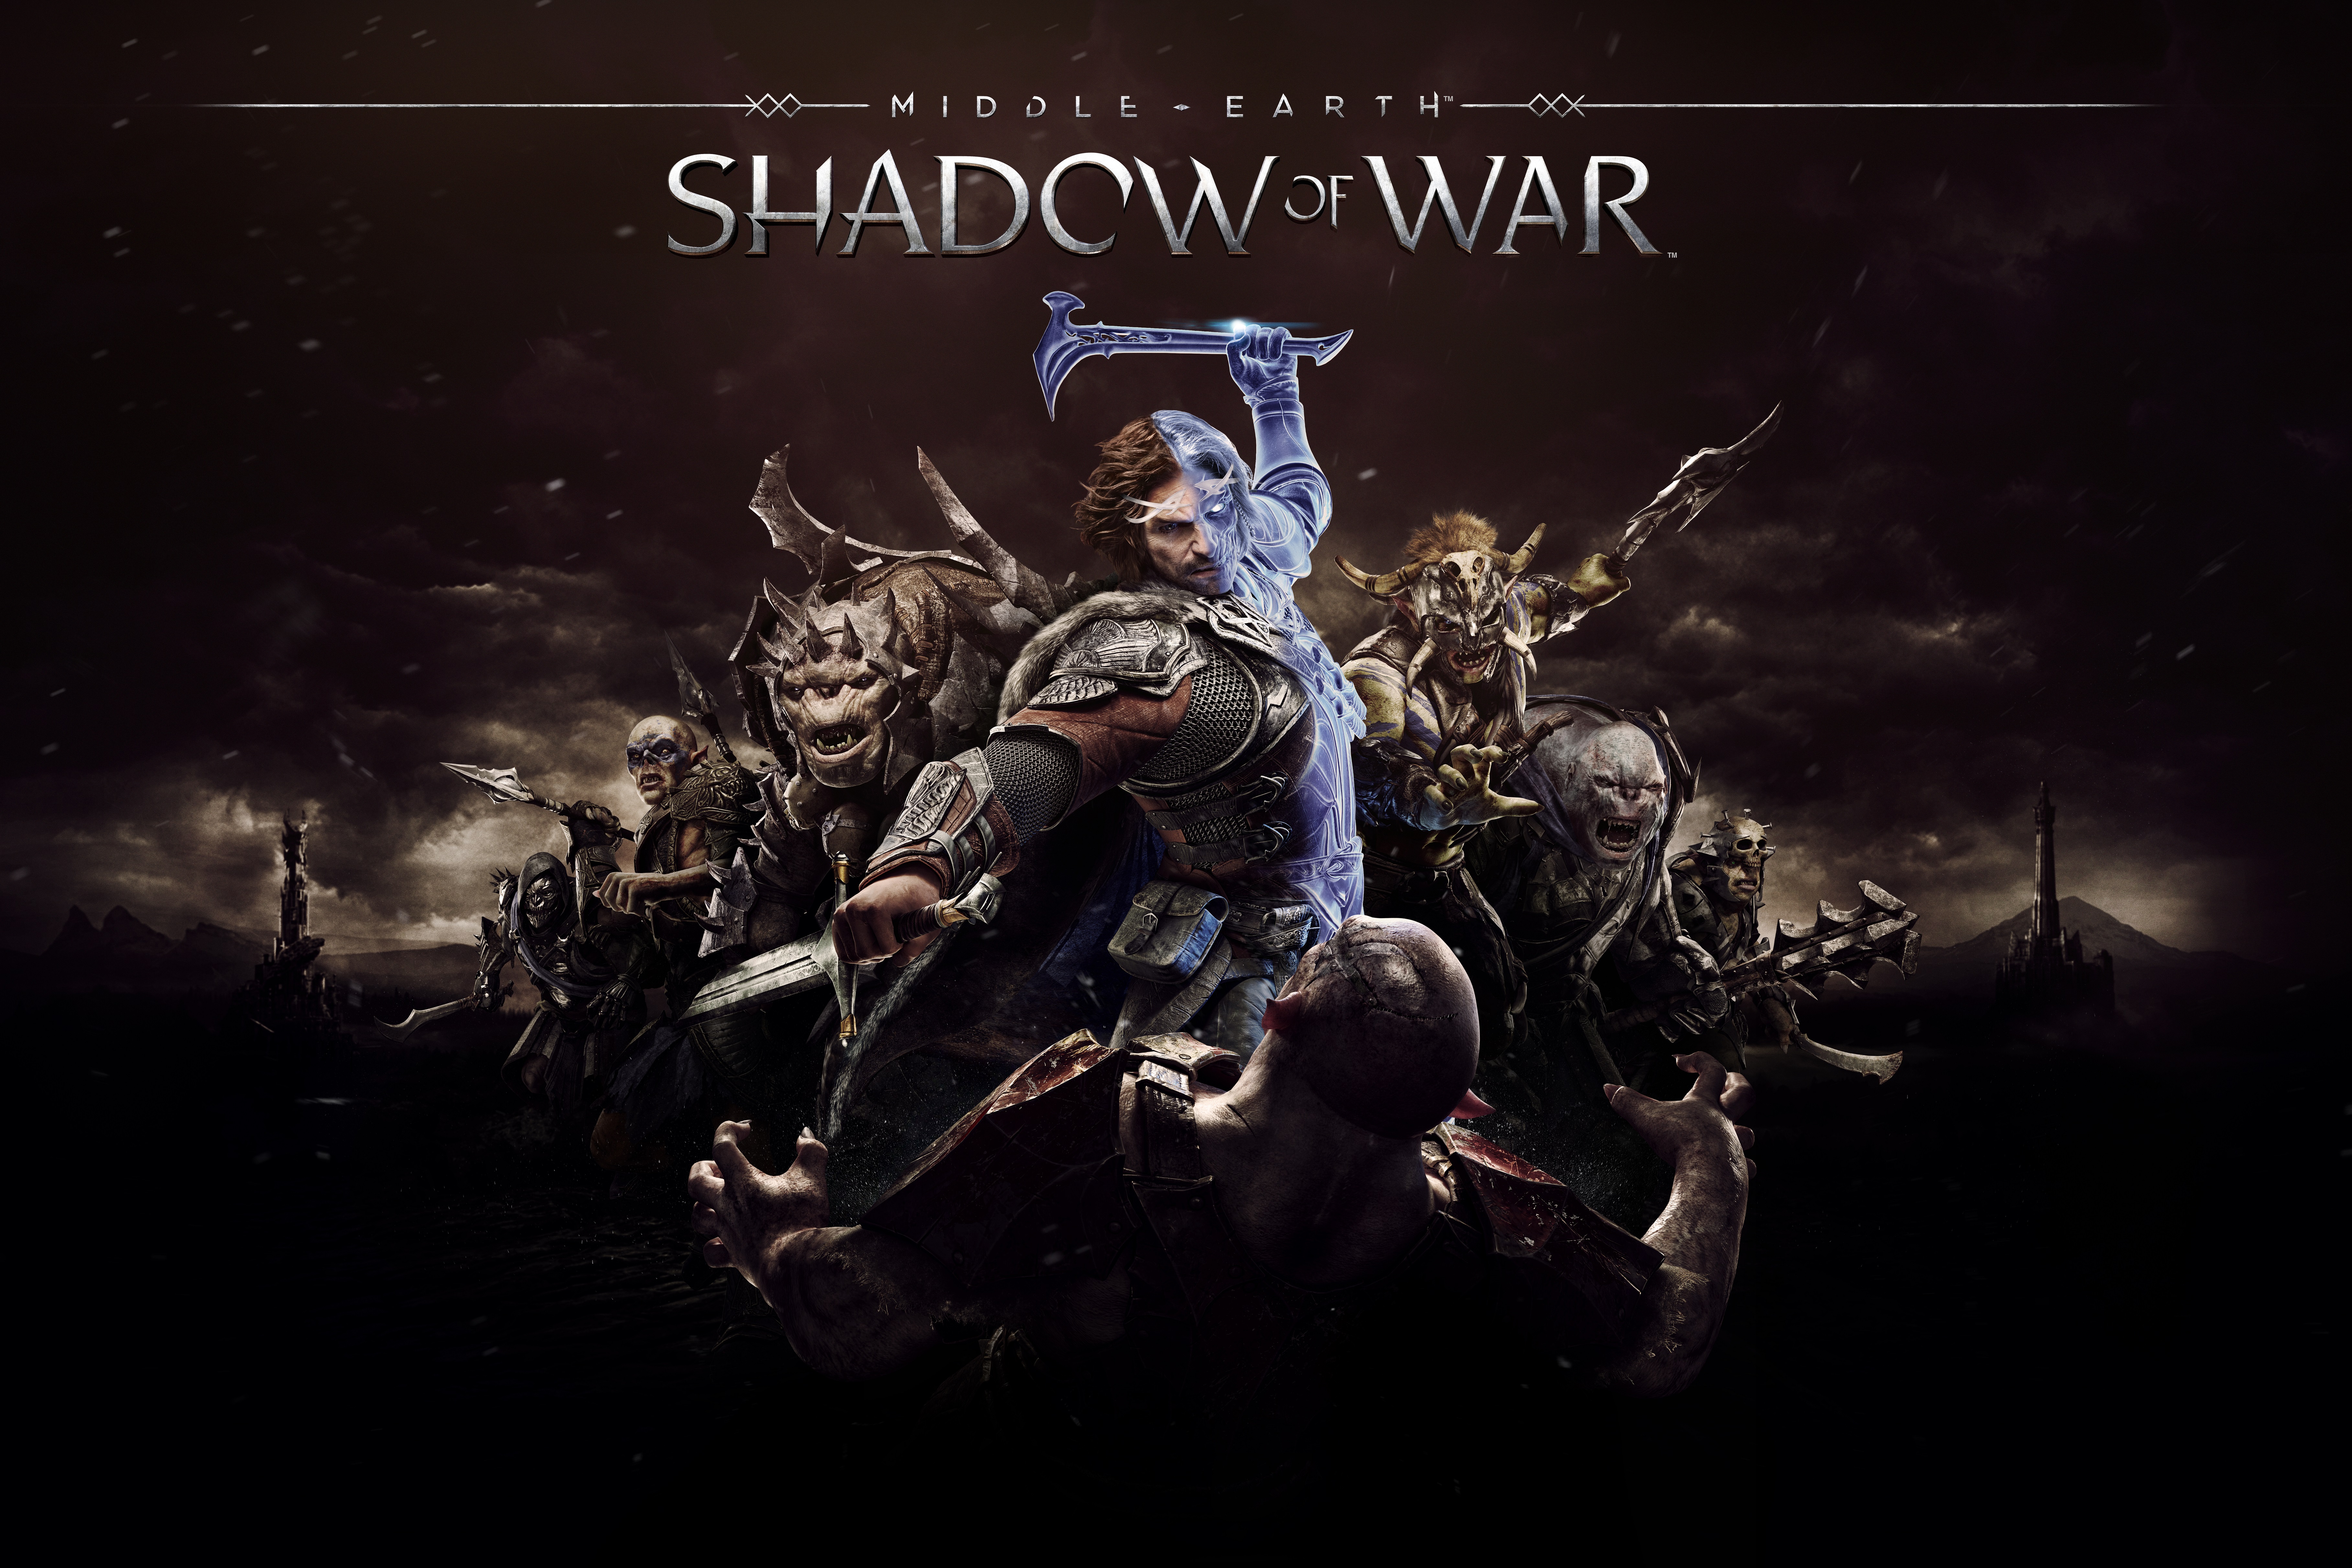 Video Games Middle Earth Shadow Of War Talion Orcs Orc The Lord Of The Rings Hammer Middle Earth Cel 7266x4844